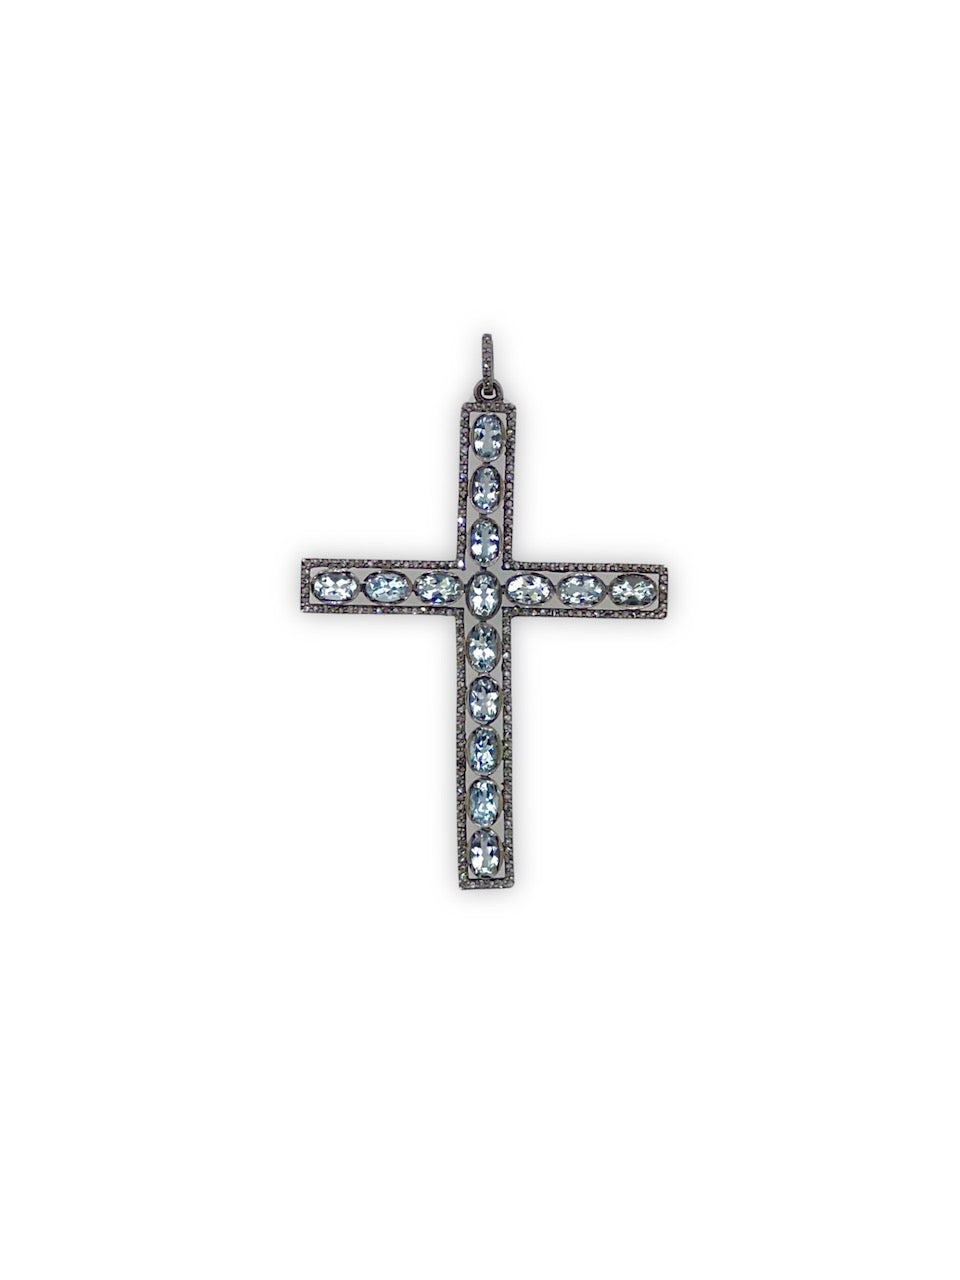 Aquamarine and Pave Diamond Cross set in Sterling Silver